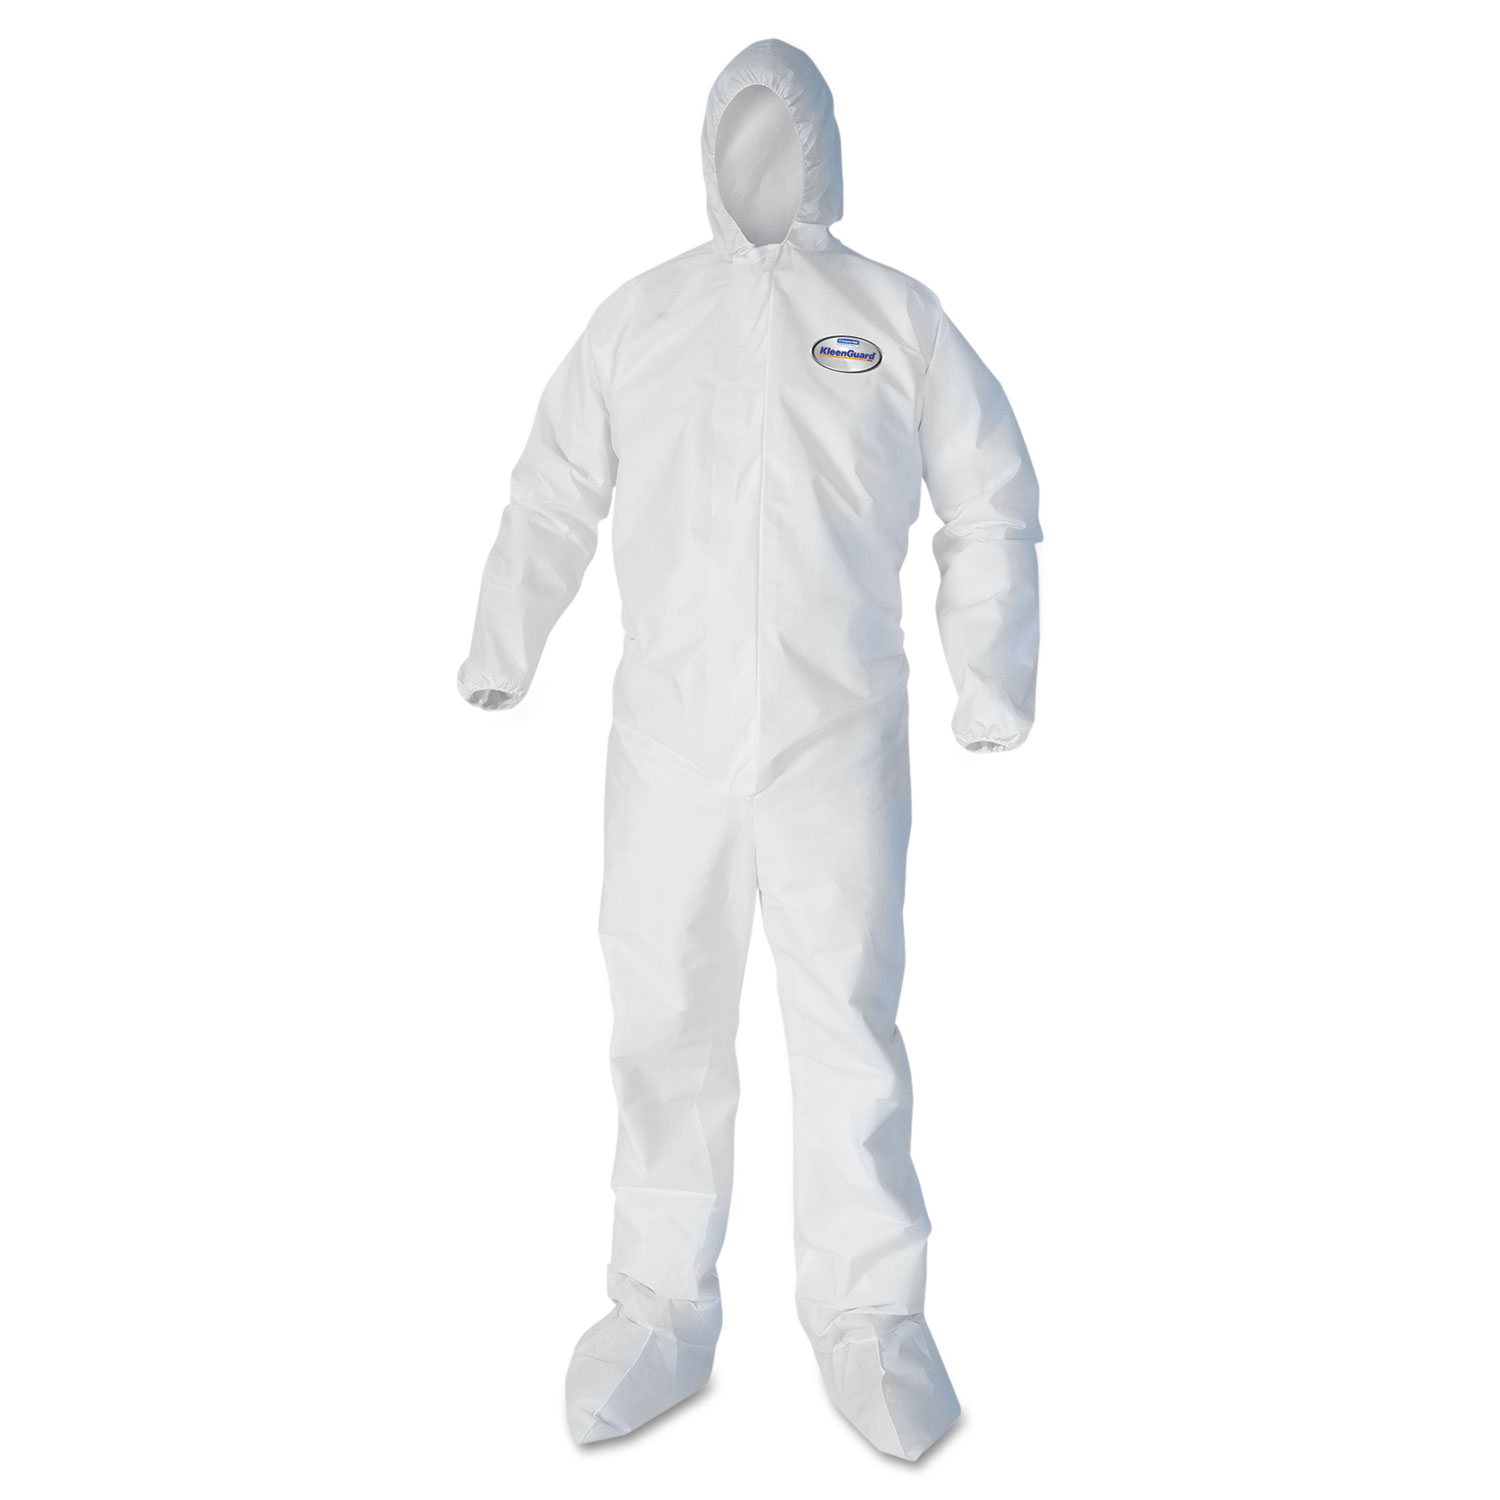 A30 Elastic Back and Cuff Hooded/Boots Coveralls, White, 4XL,21/Ct